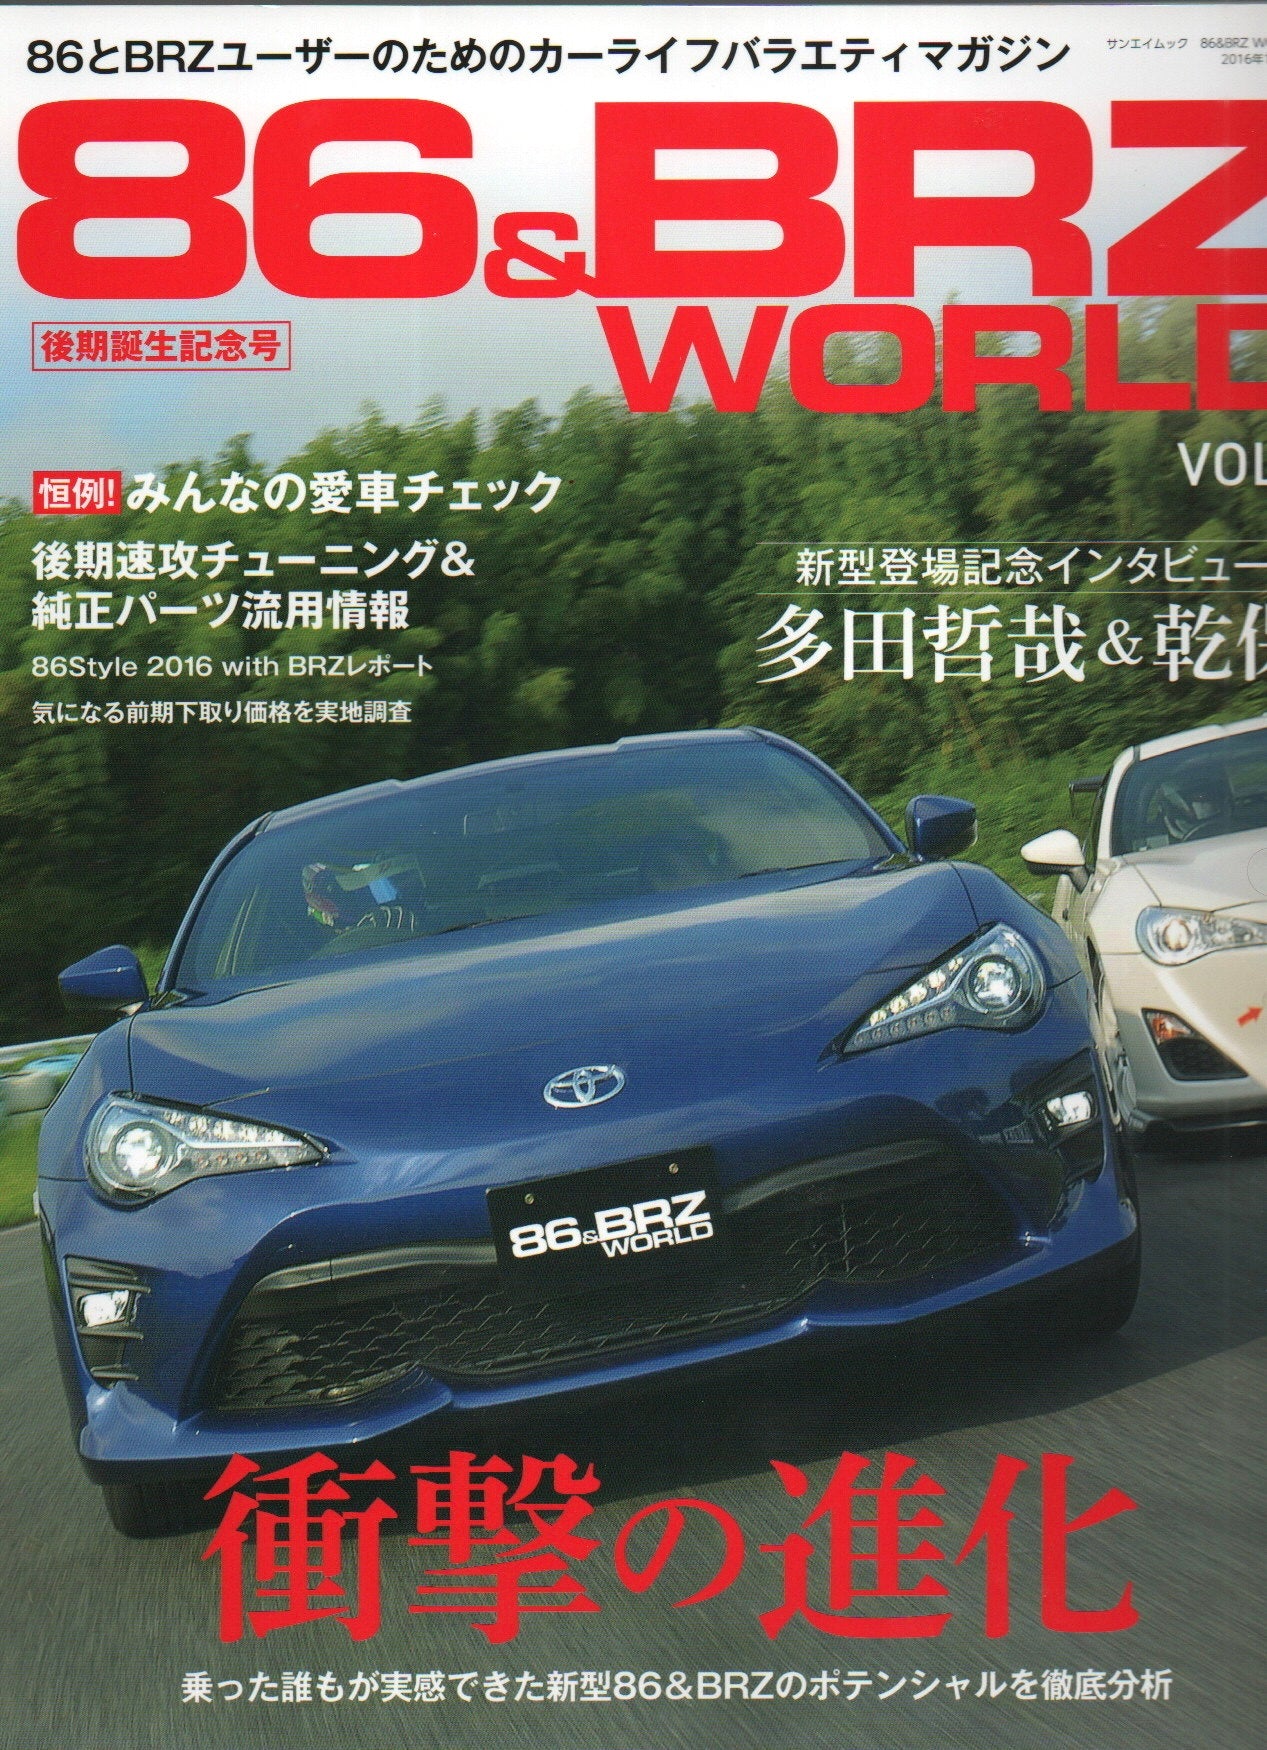 86 & BRZ WORLD Magazine (Extreme Style Guide) XL Fancy Mag